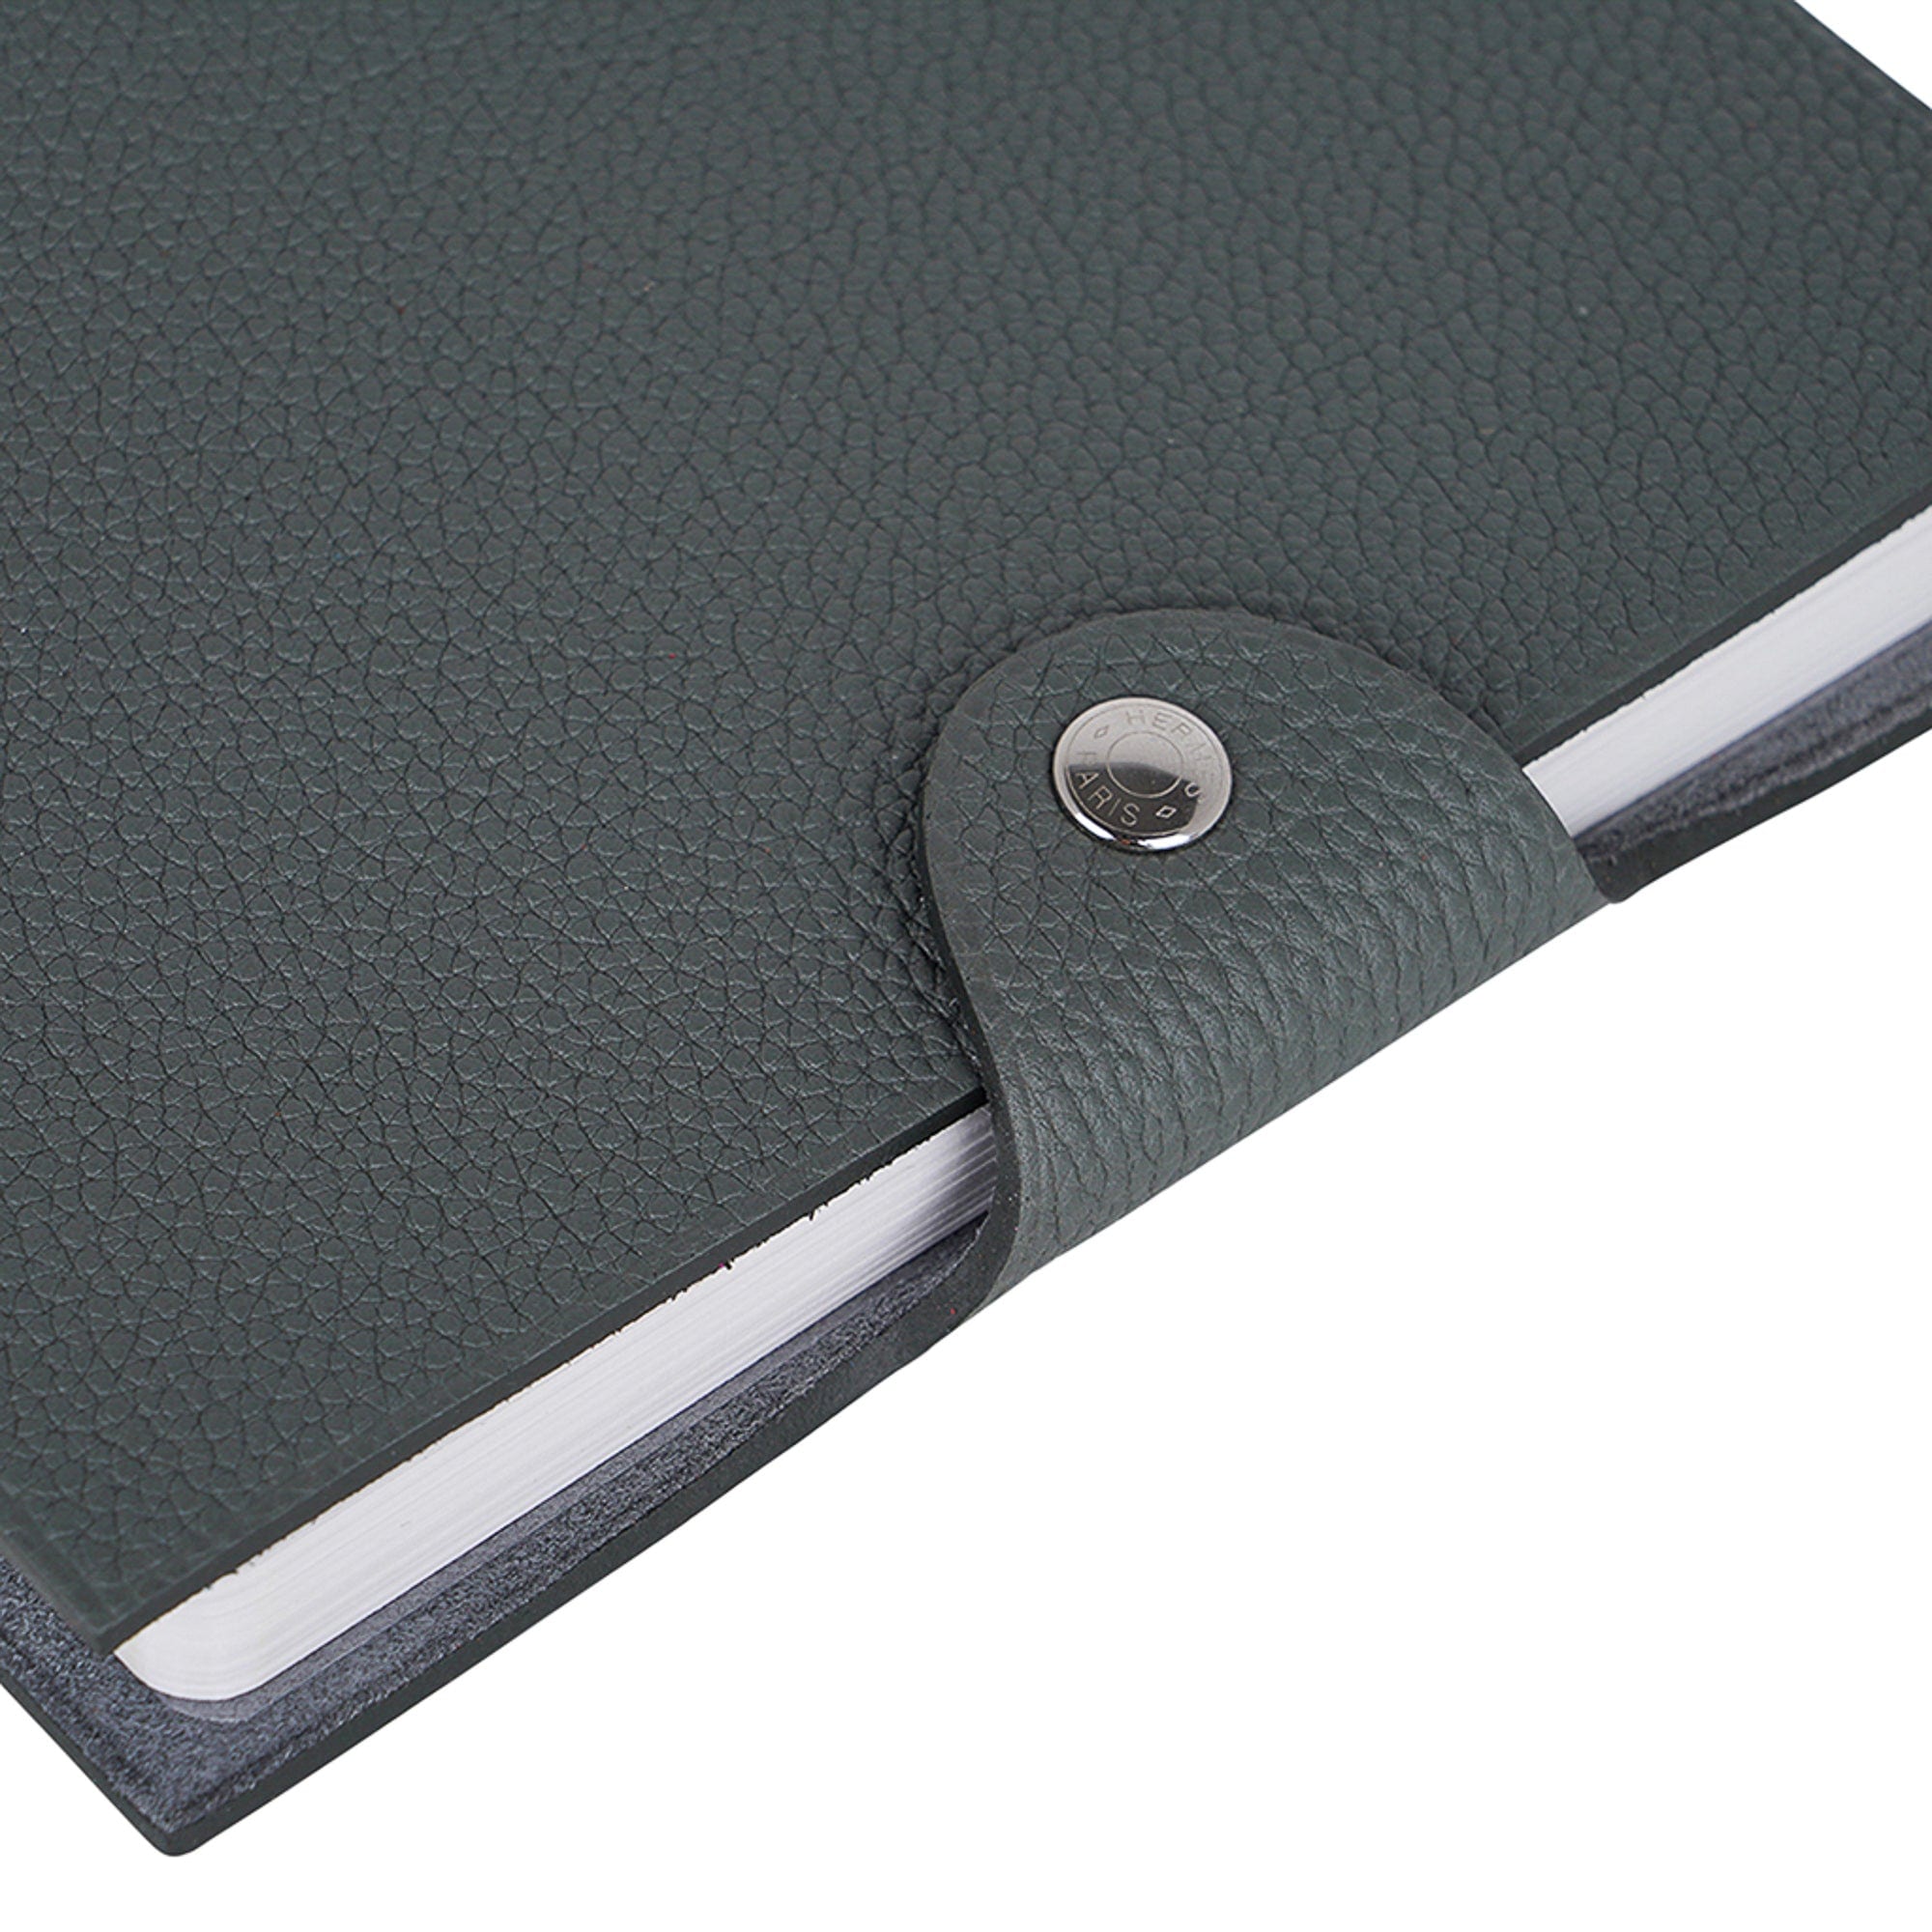 Hermes Ulysse PM Notebook Cover Vert Amande with Refill